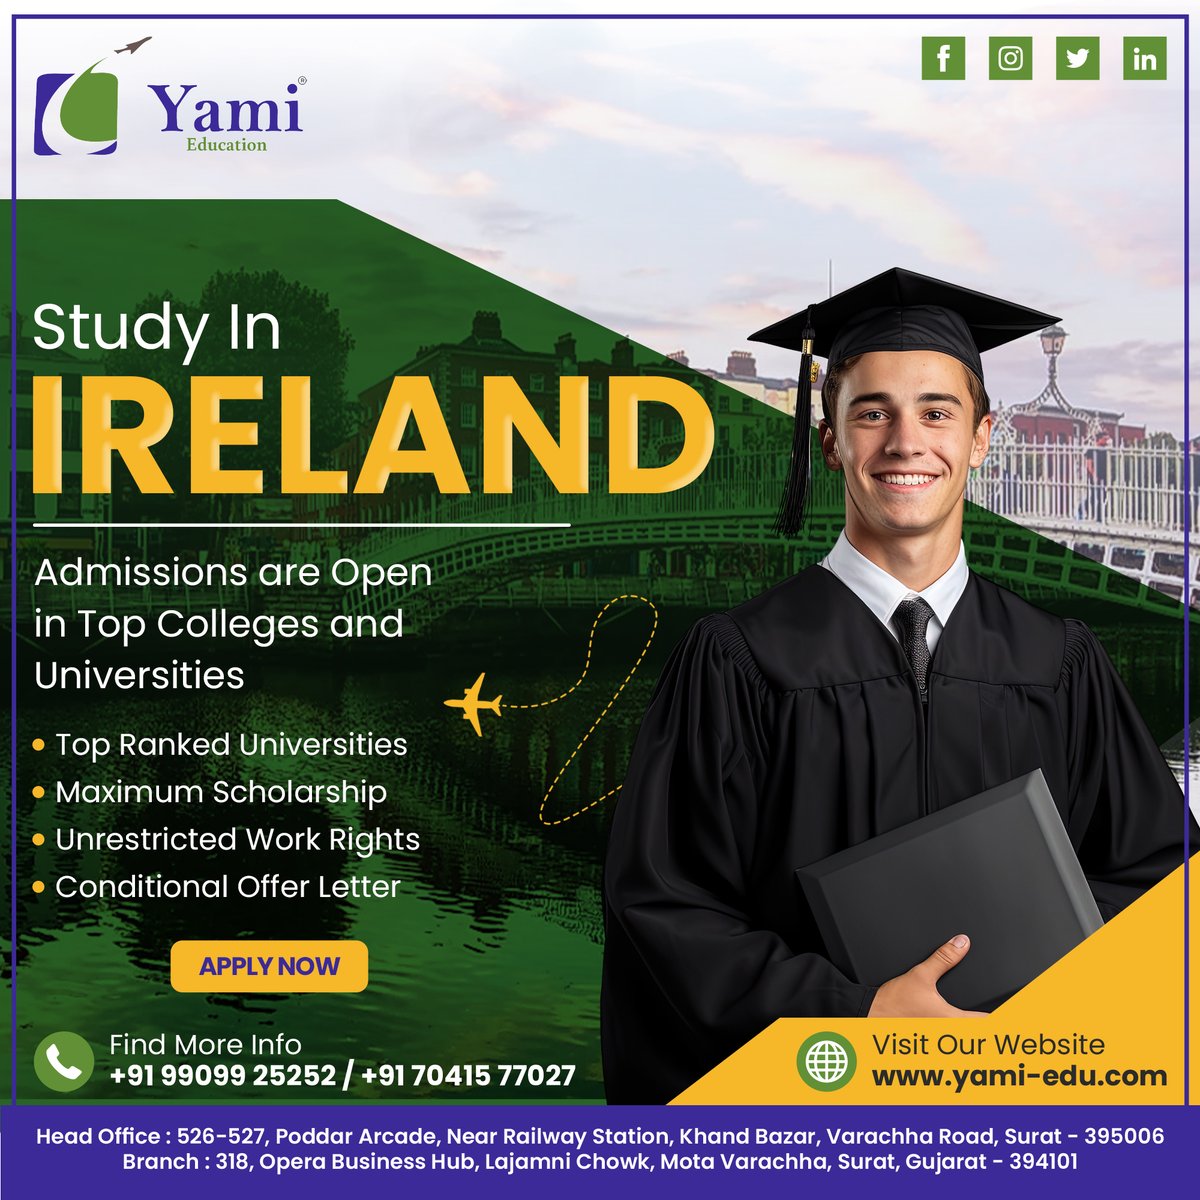 📢 Study in IRELAND
➡️ Admissions are Open in Top Colleges and Universities
☎️ Call us +91 99099 25252 / +91 70415 77027
🌐 Visit Our Website yami-edu.com
#yami #yamiimmigration #studyinireland #irelandeducation #irelanduniversities #internationalstudent #topcolleges